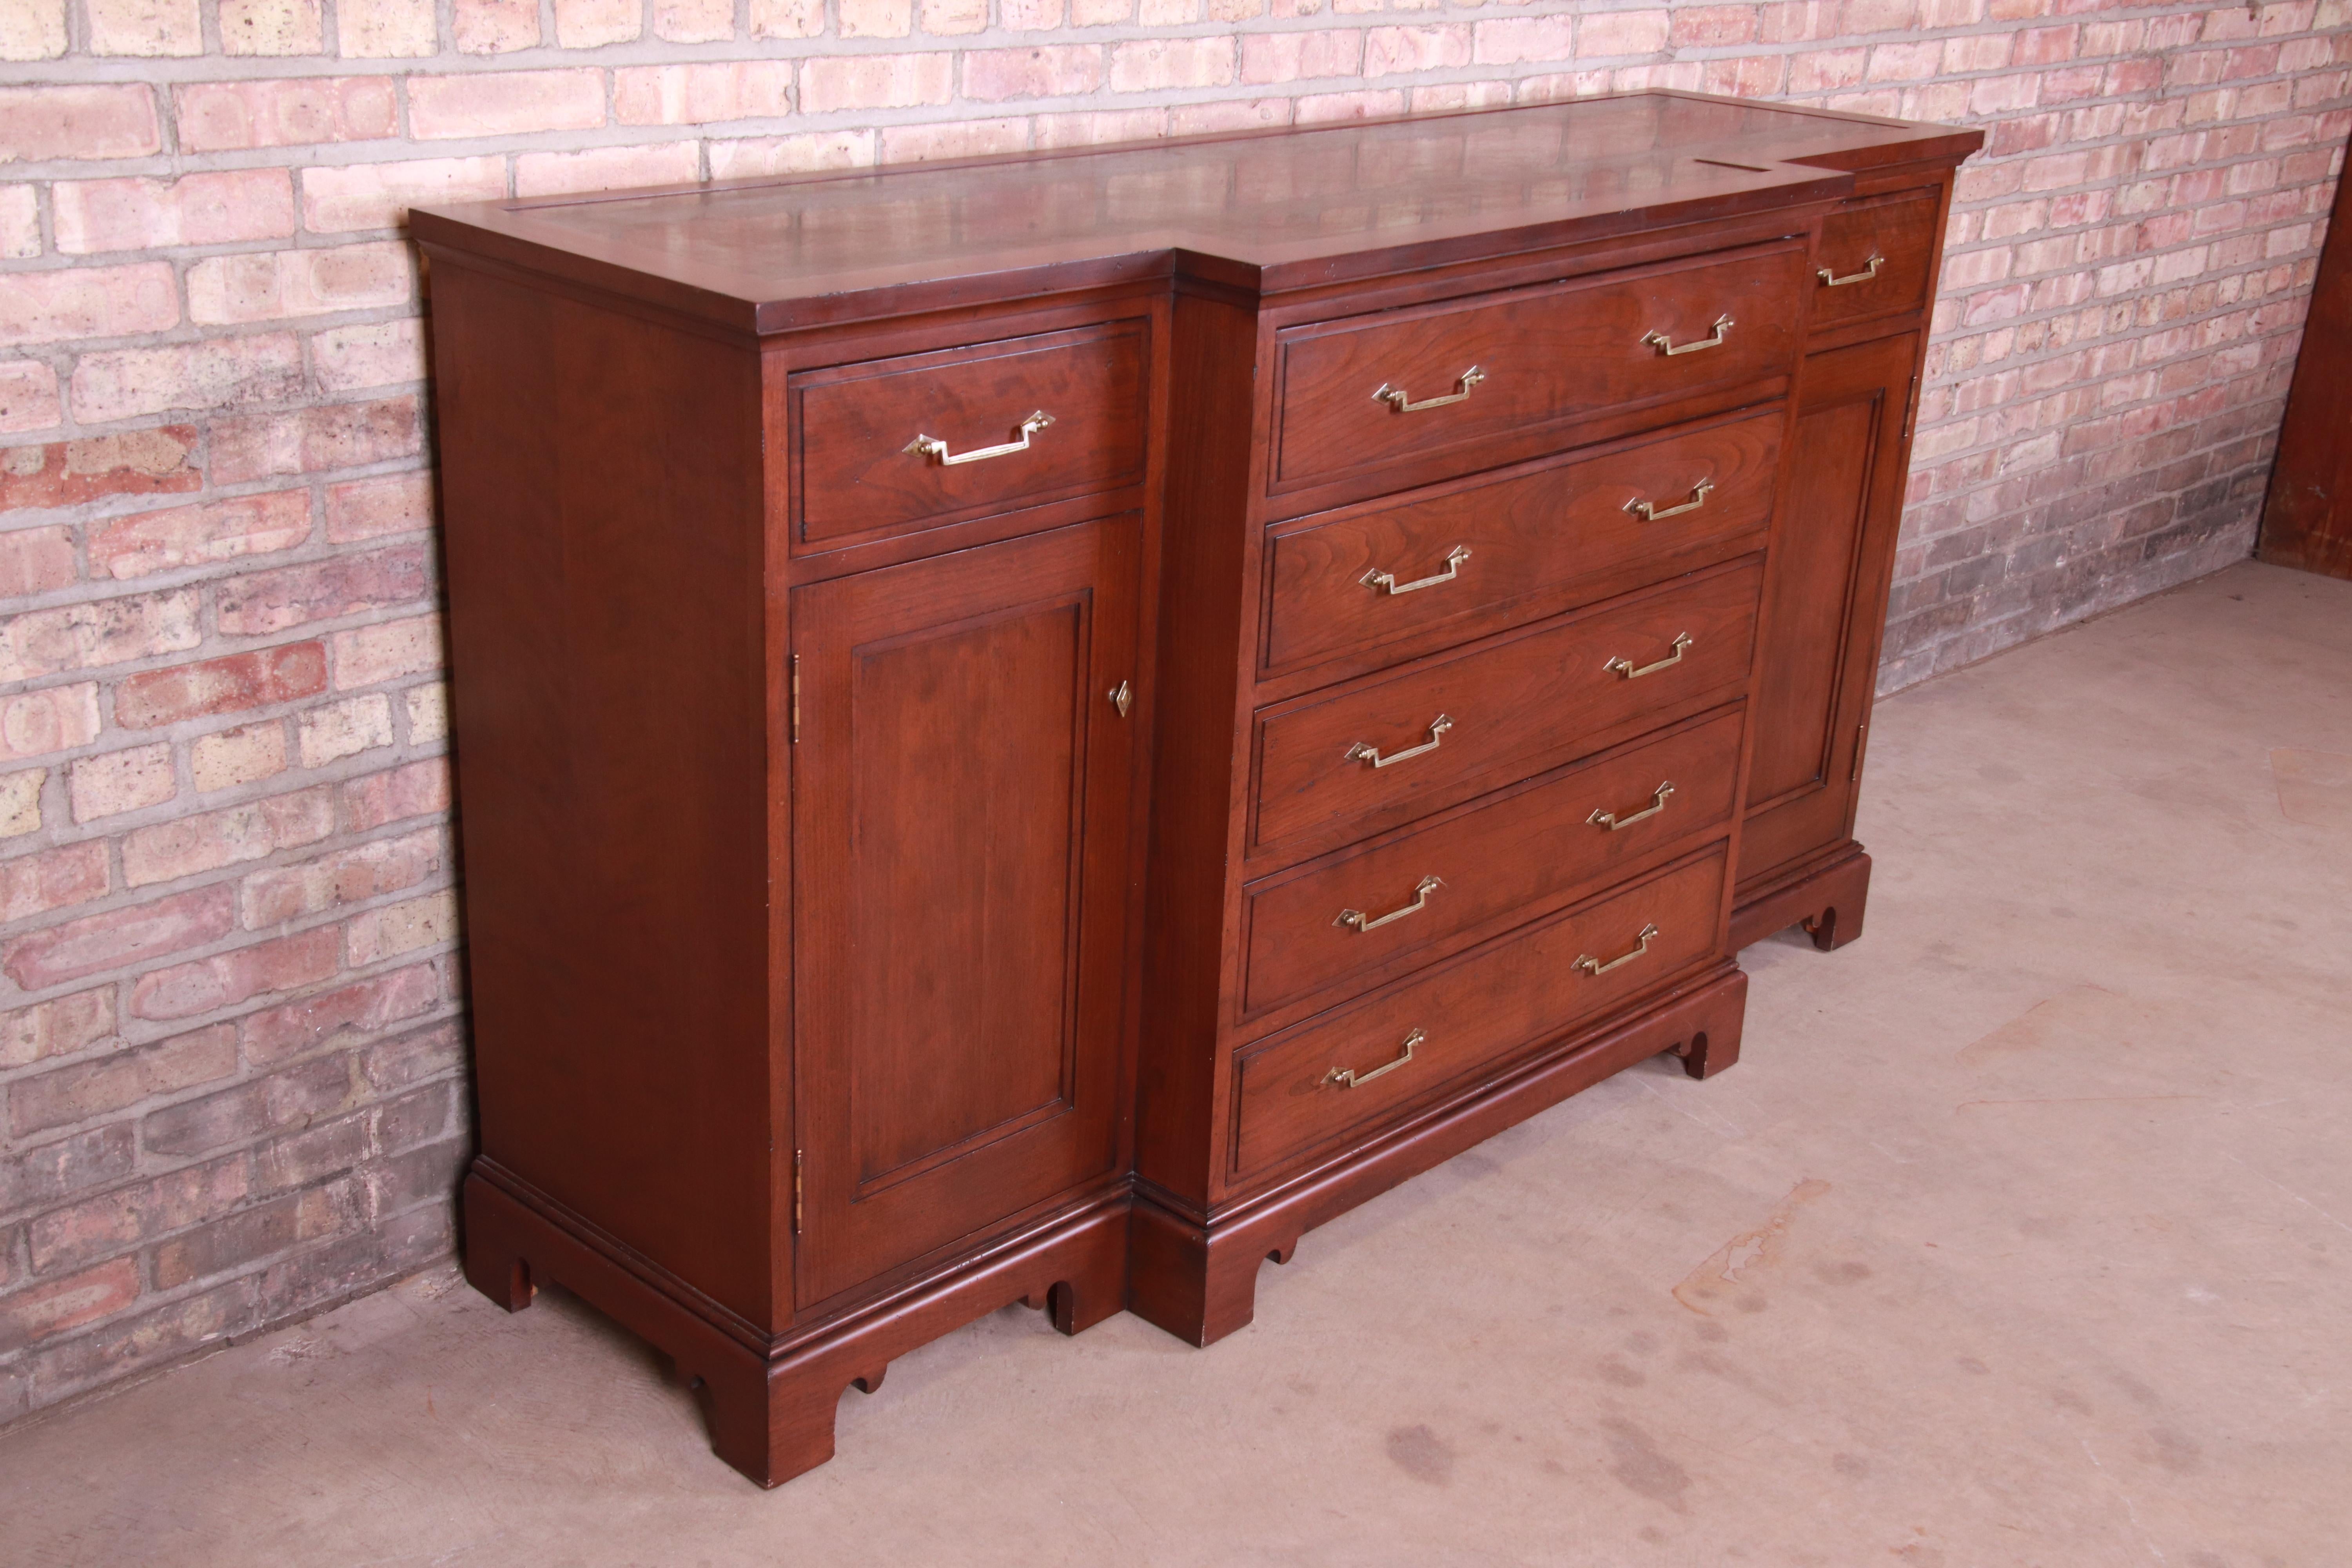 20th Century French Provincial Solid Mahogany Marble Top Sideboard Attributed to Grange